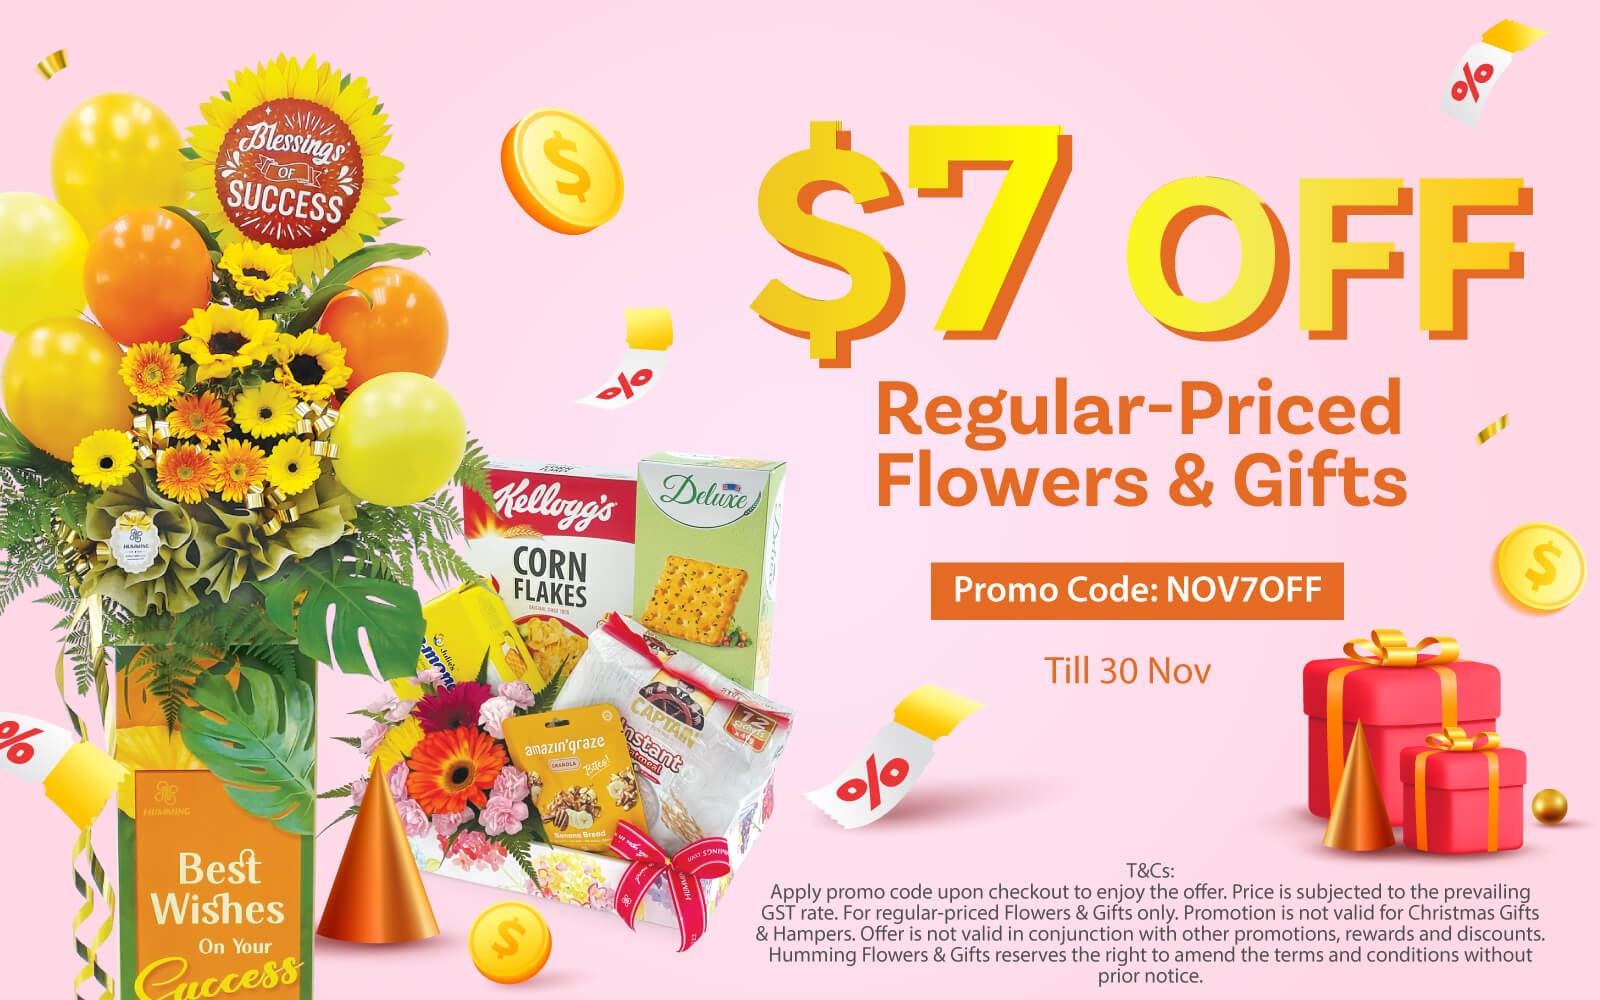 Flowers & Gifts Promotion